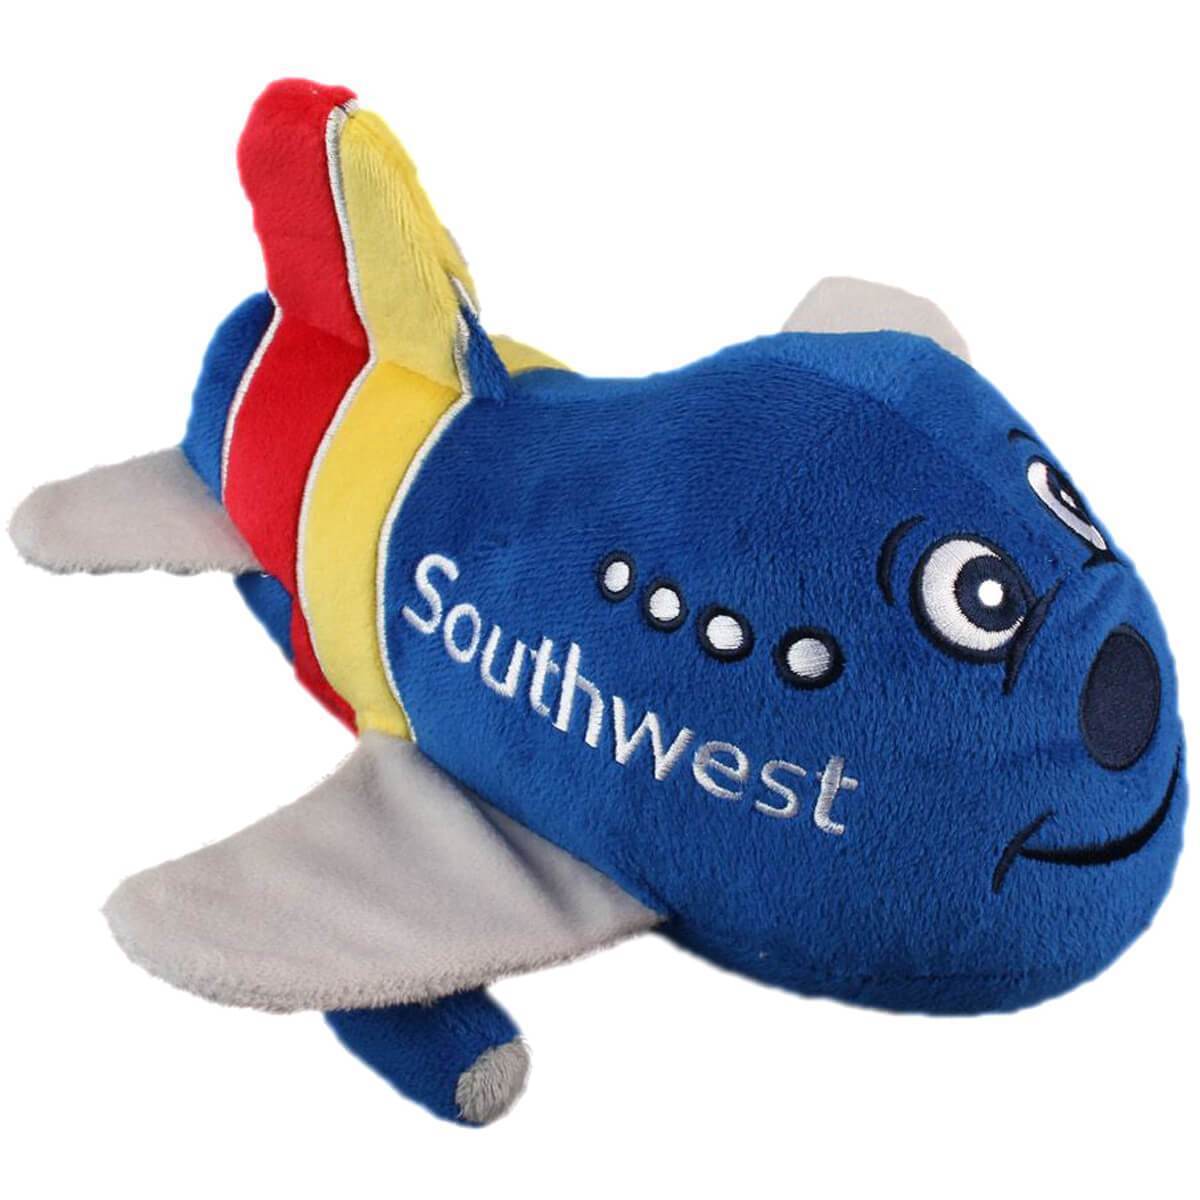 Southwest Airlines Plush Airplane Toy